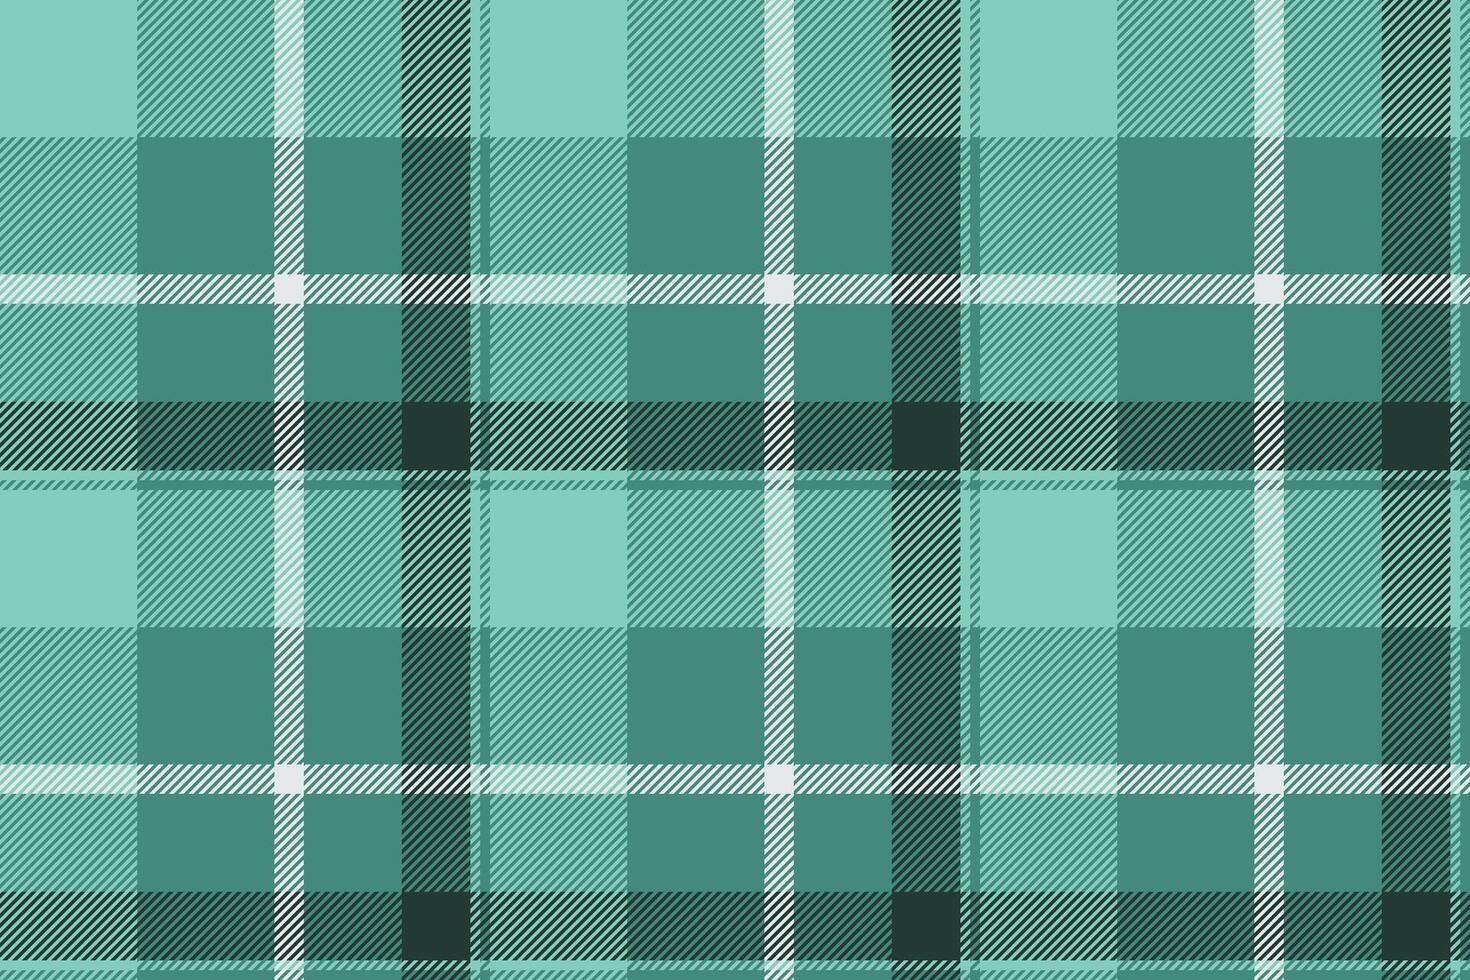 Plaid background, check seamless pattern. fabric texture for textile print, wrapping paper, gift card or wallpaper. vector